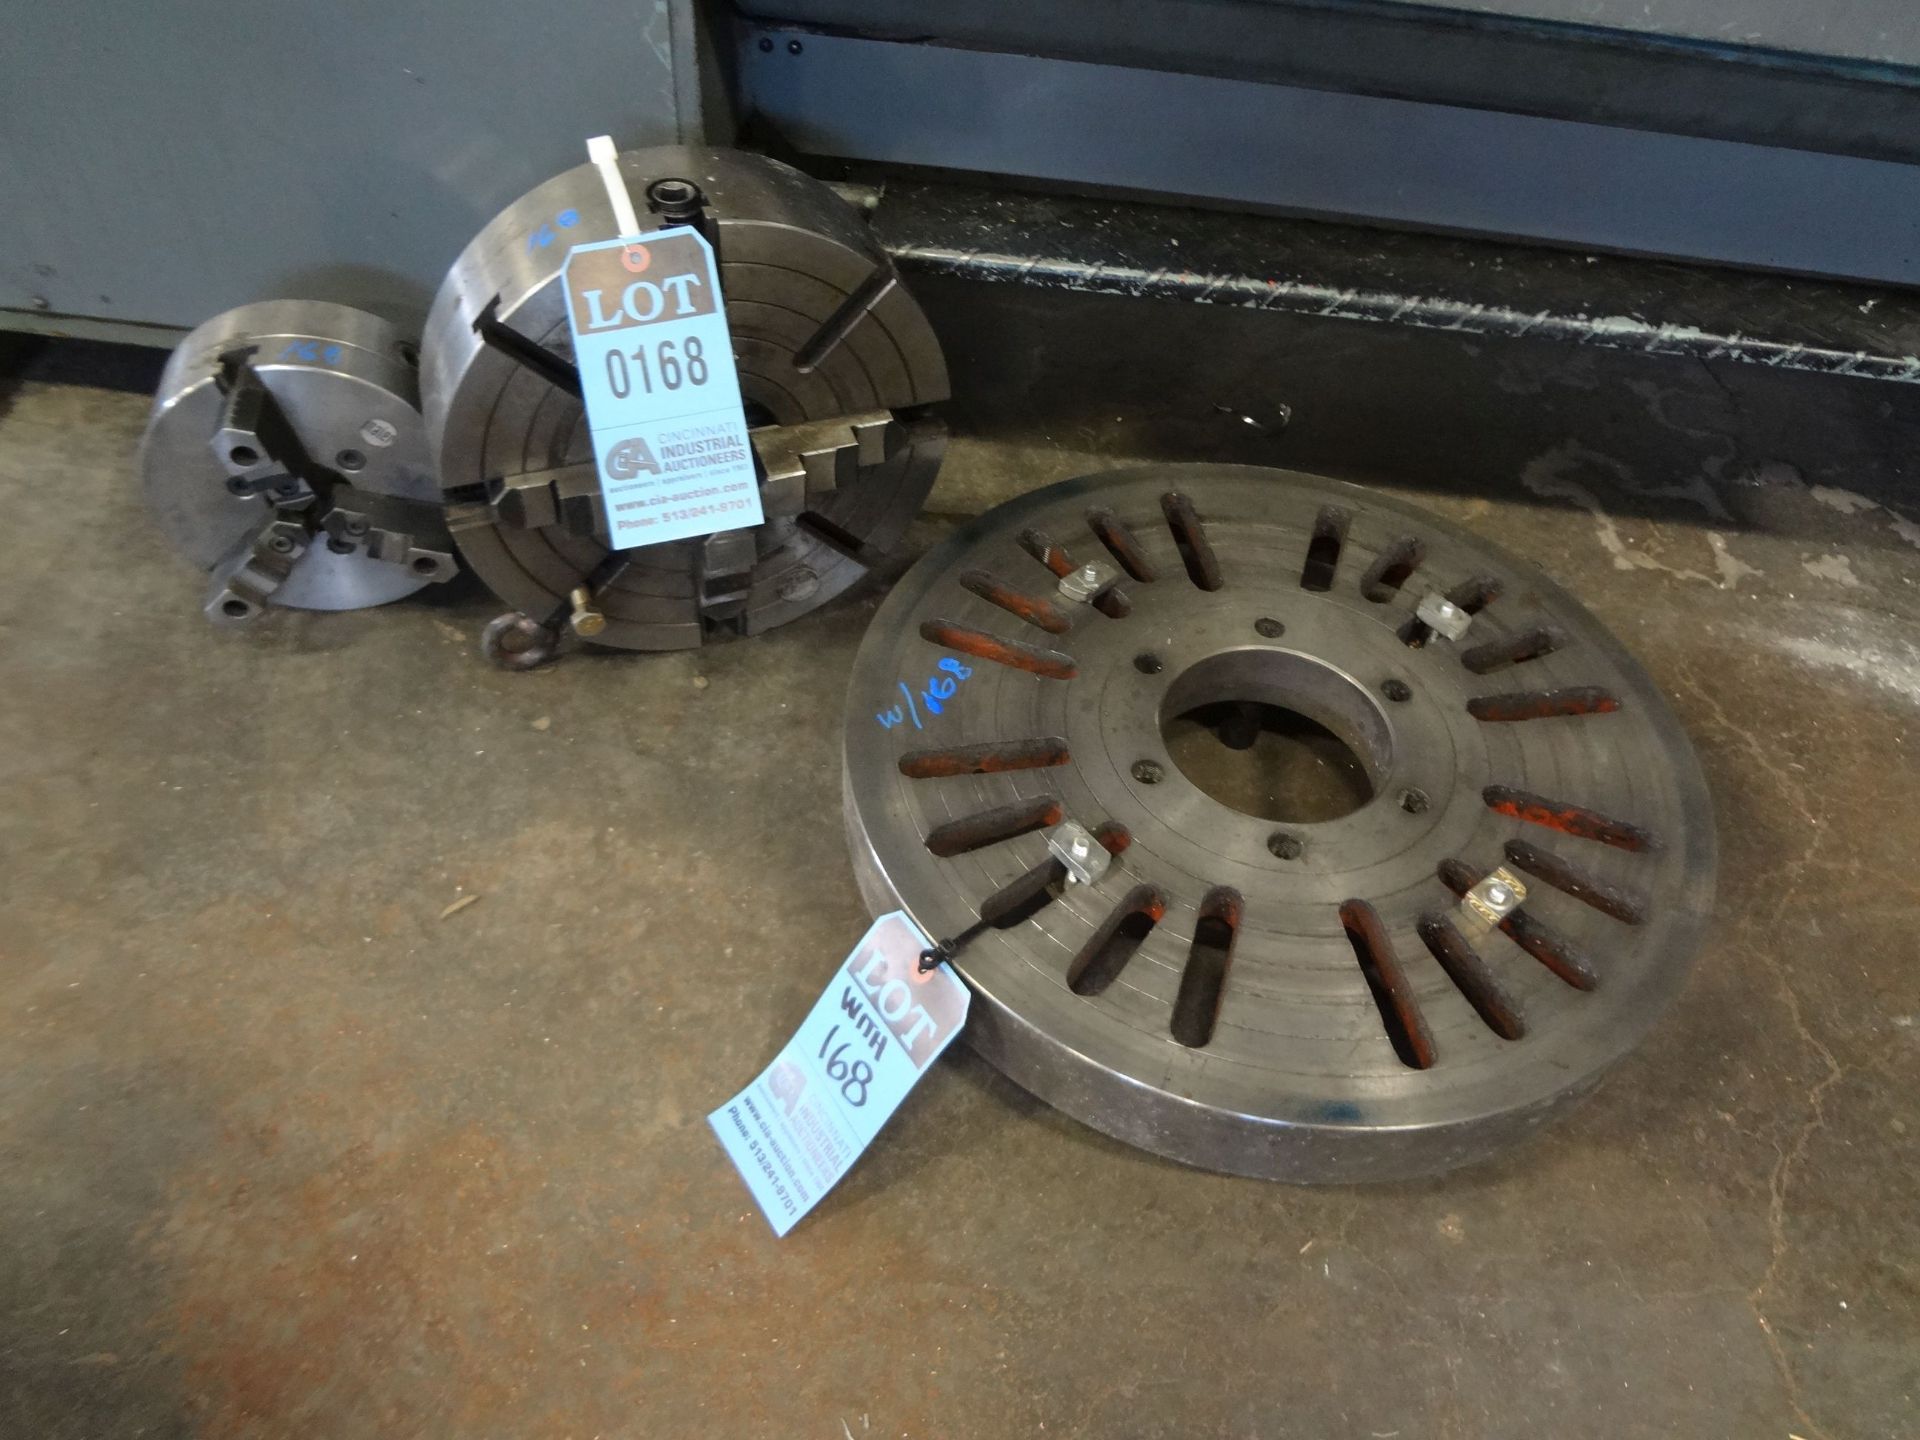 12" FOUR-JAW CHUCK WITH 8" 3-JAW CHUCK AND 20" FACE PLATE